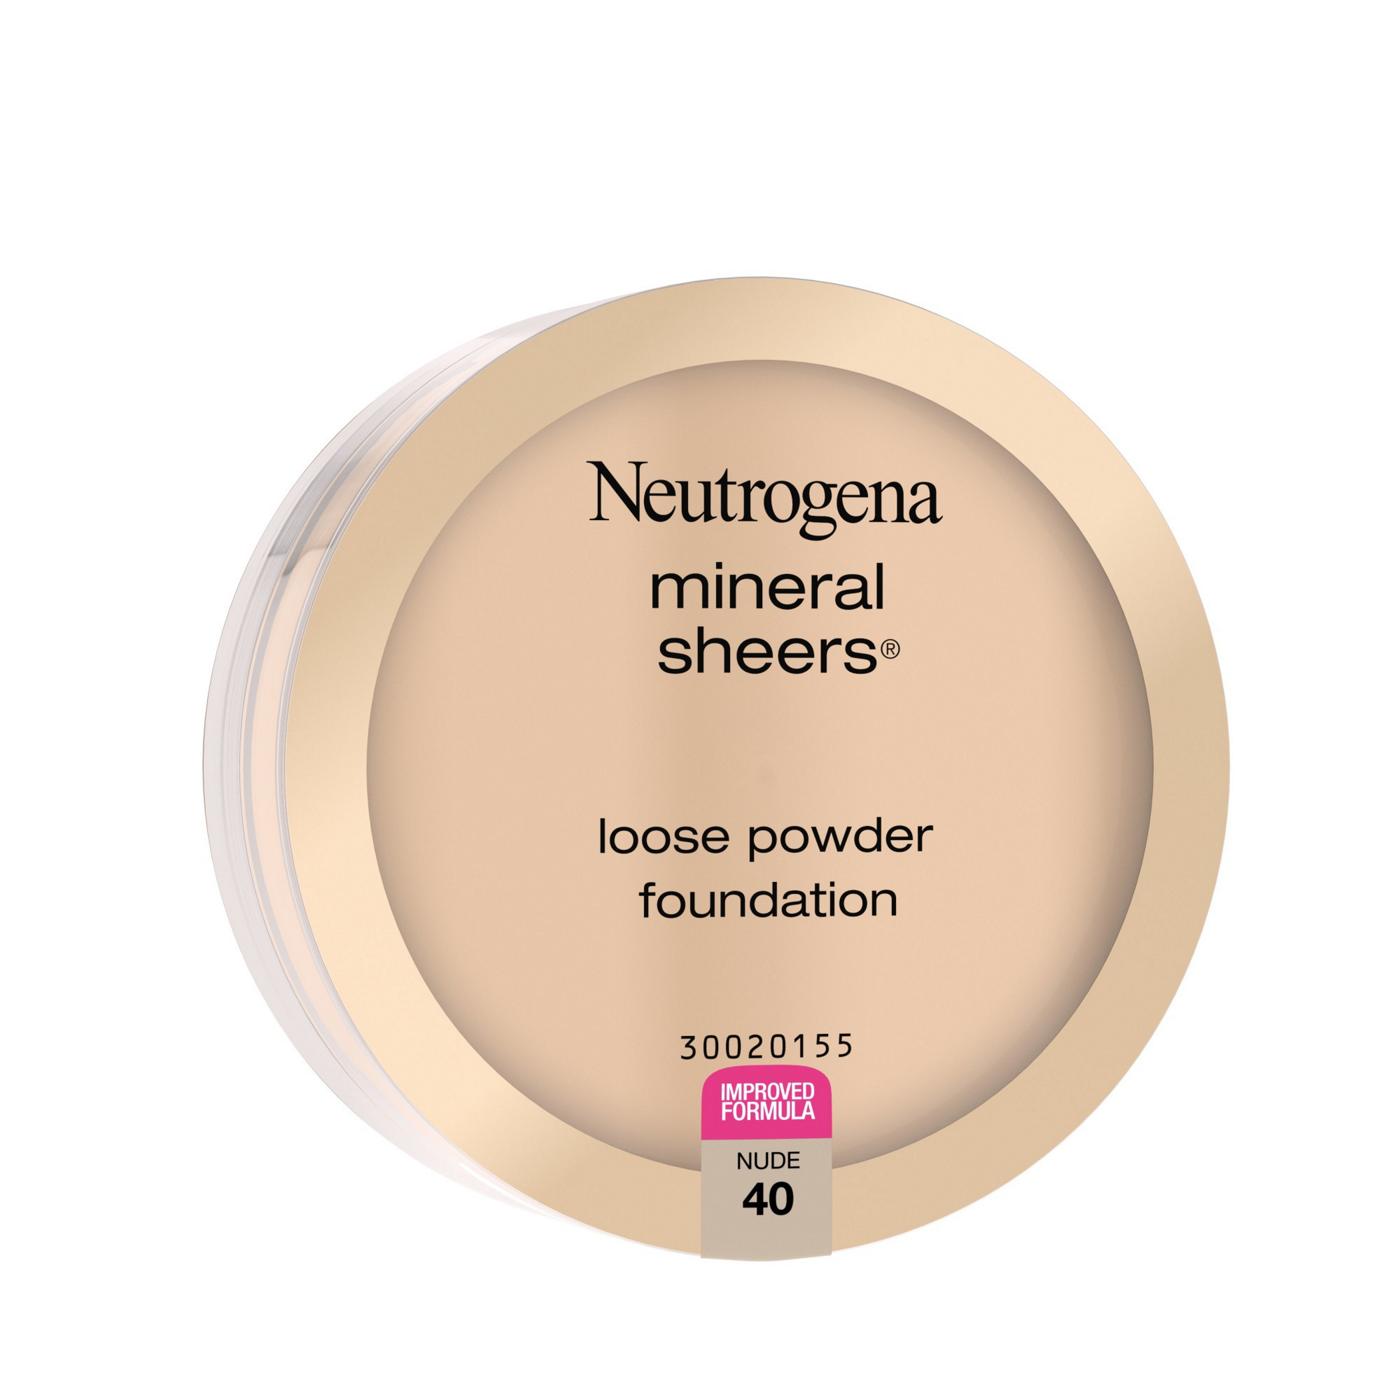 Neutrogena Mineral Sheers Loose Powder Foundation 40 Nude; image 4 of 5